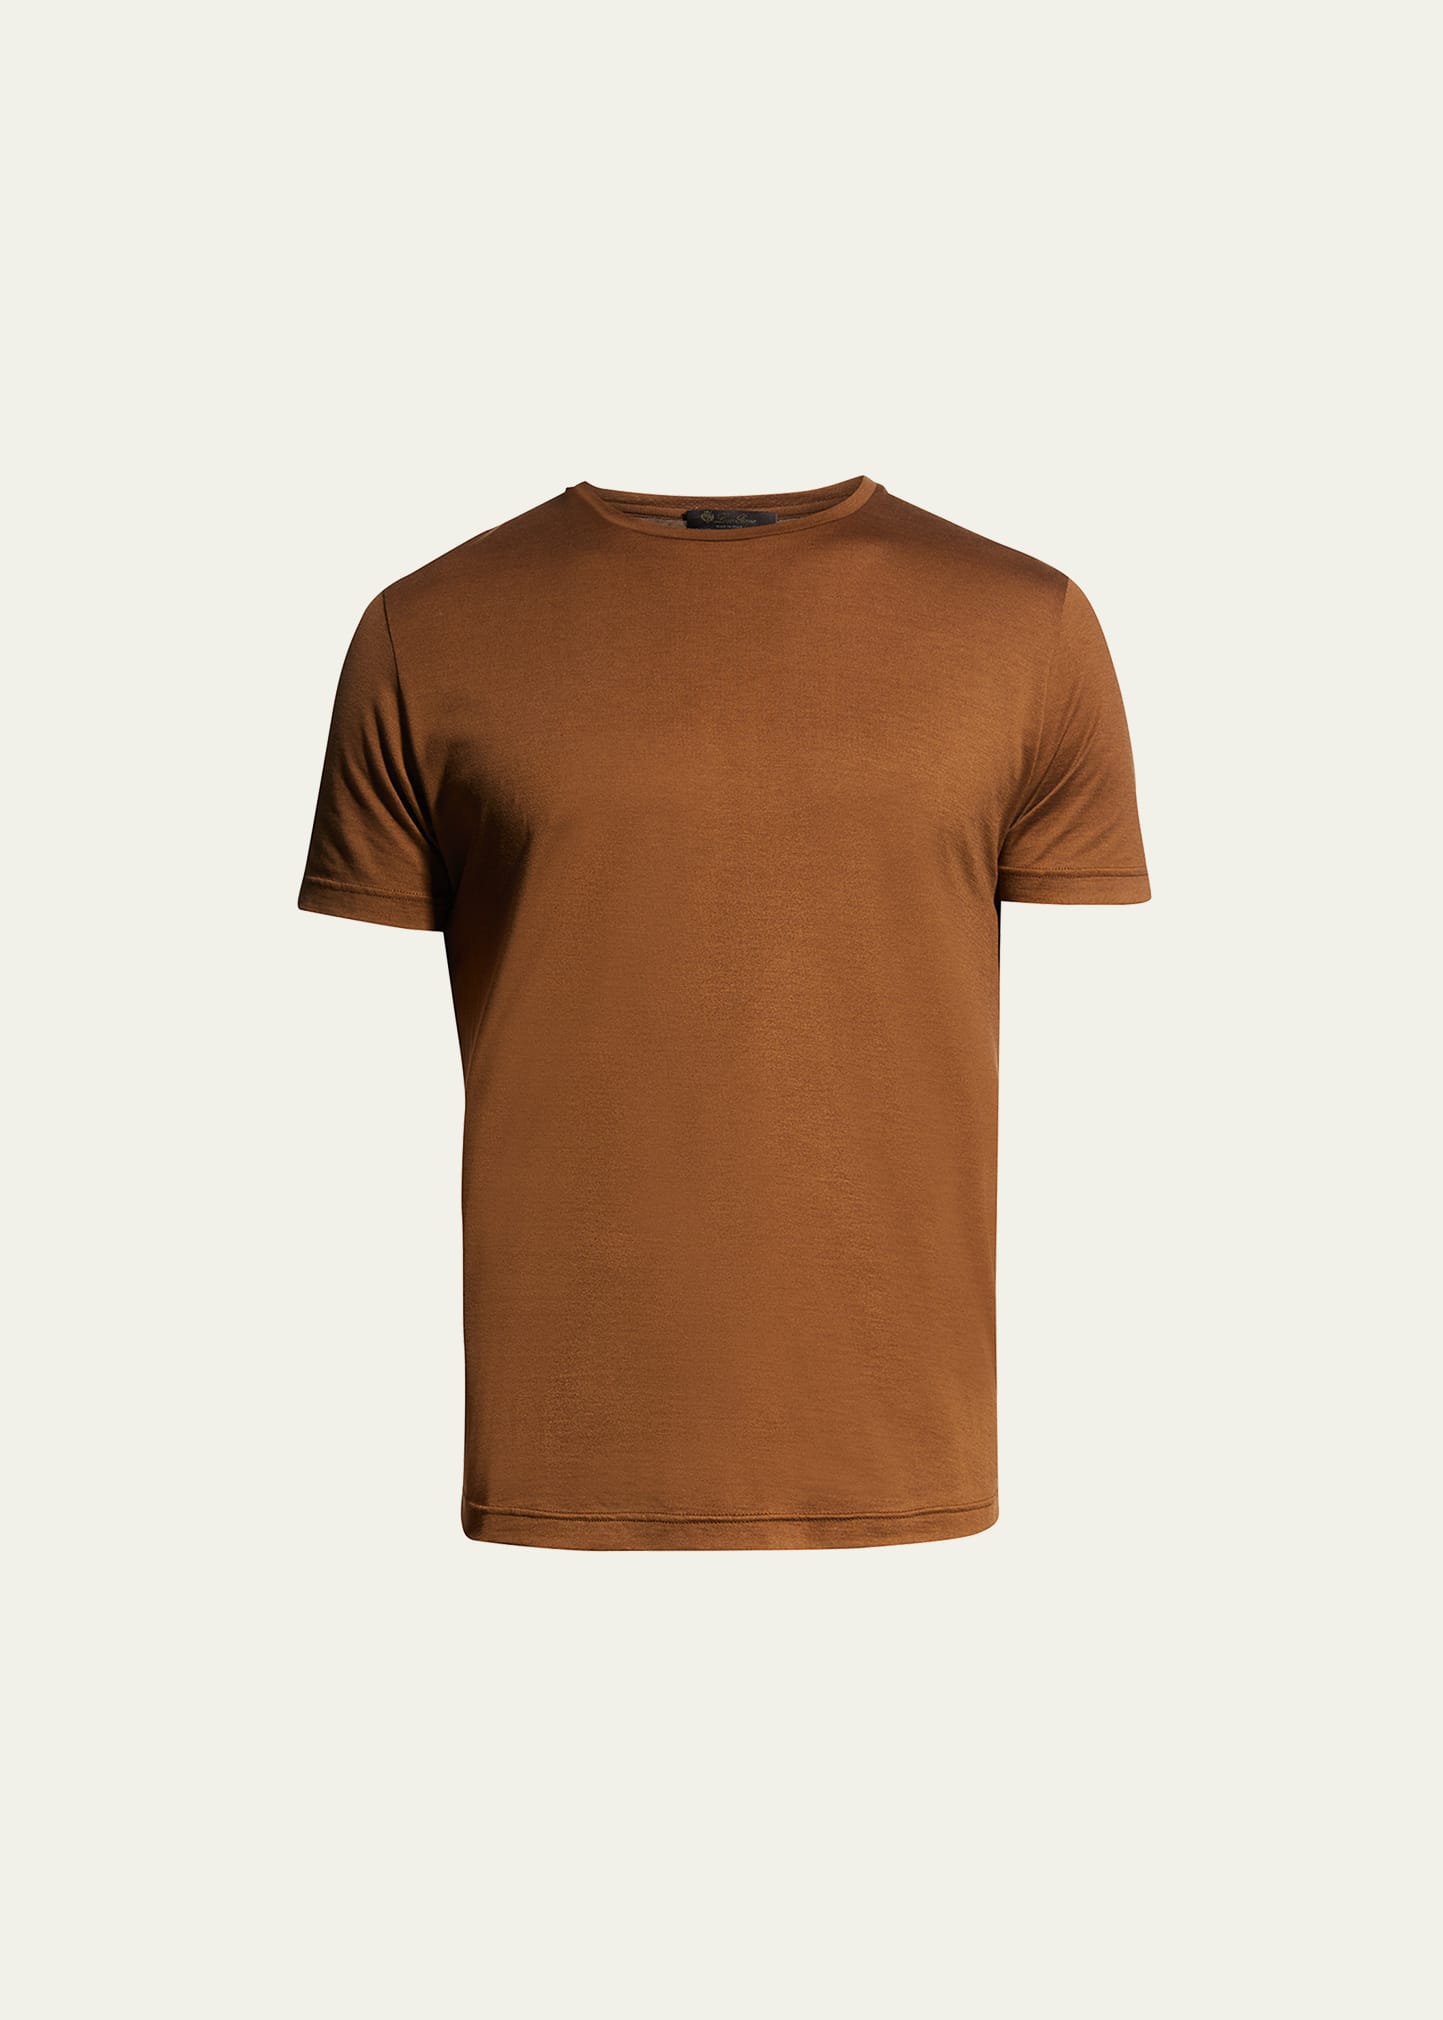 LORO PIANA Logo-Embroidered Cotton-Jersey T-Shirt for Men